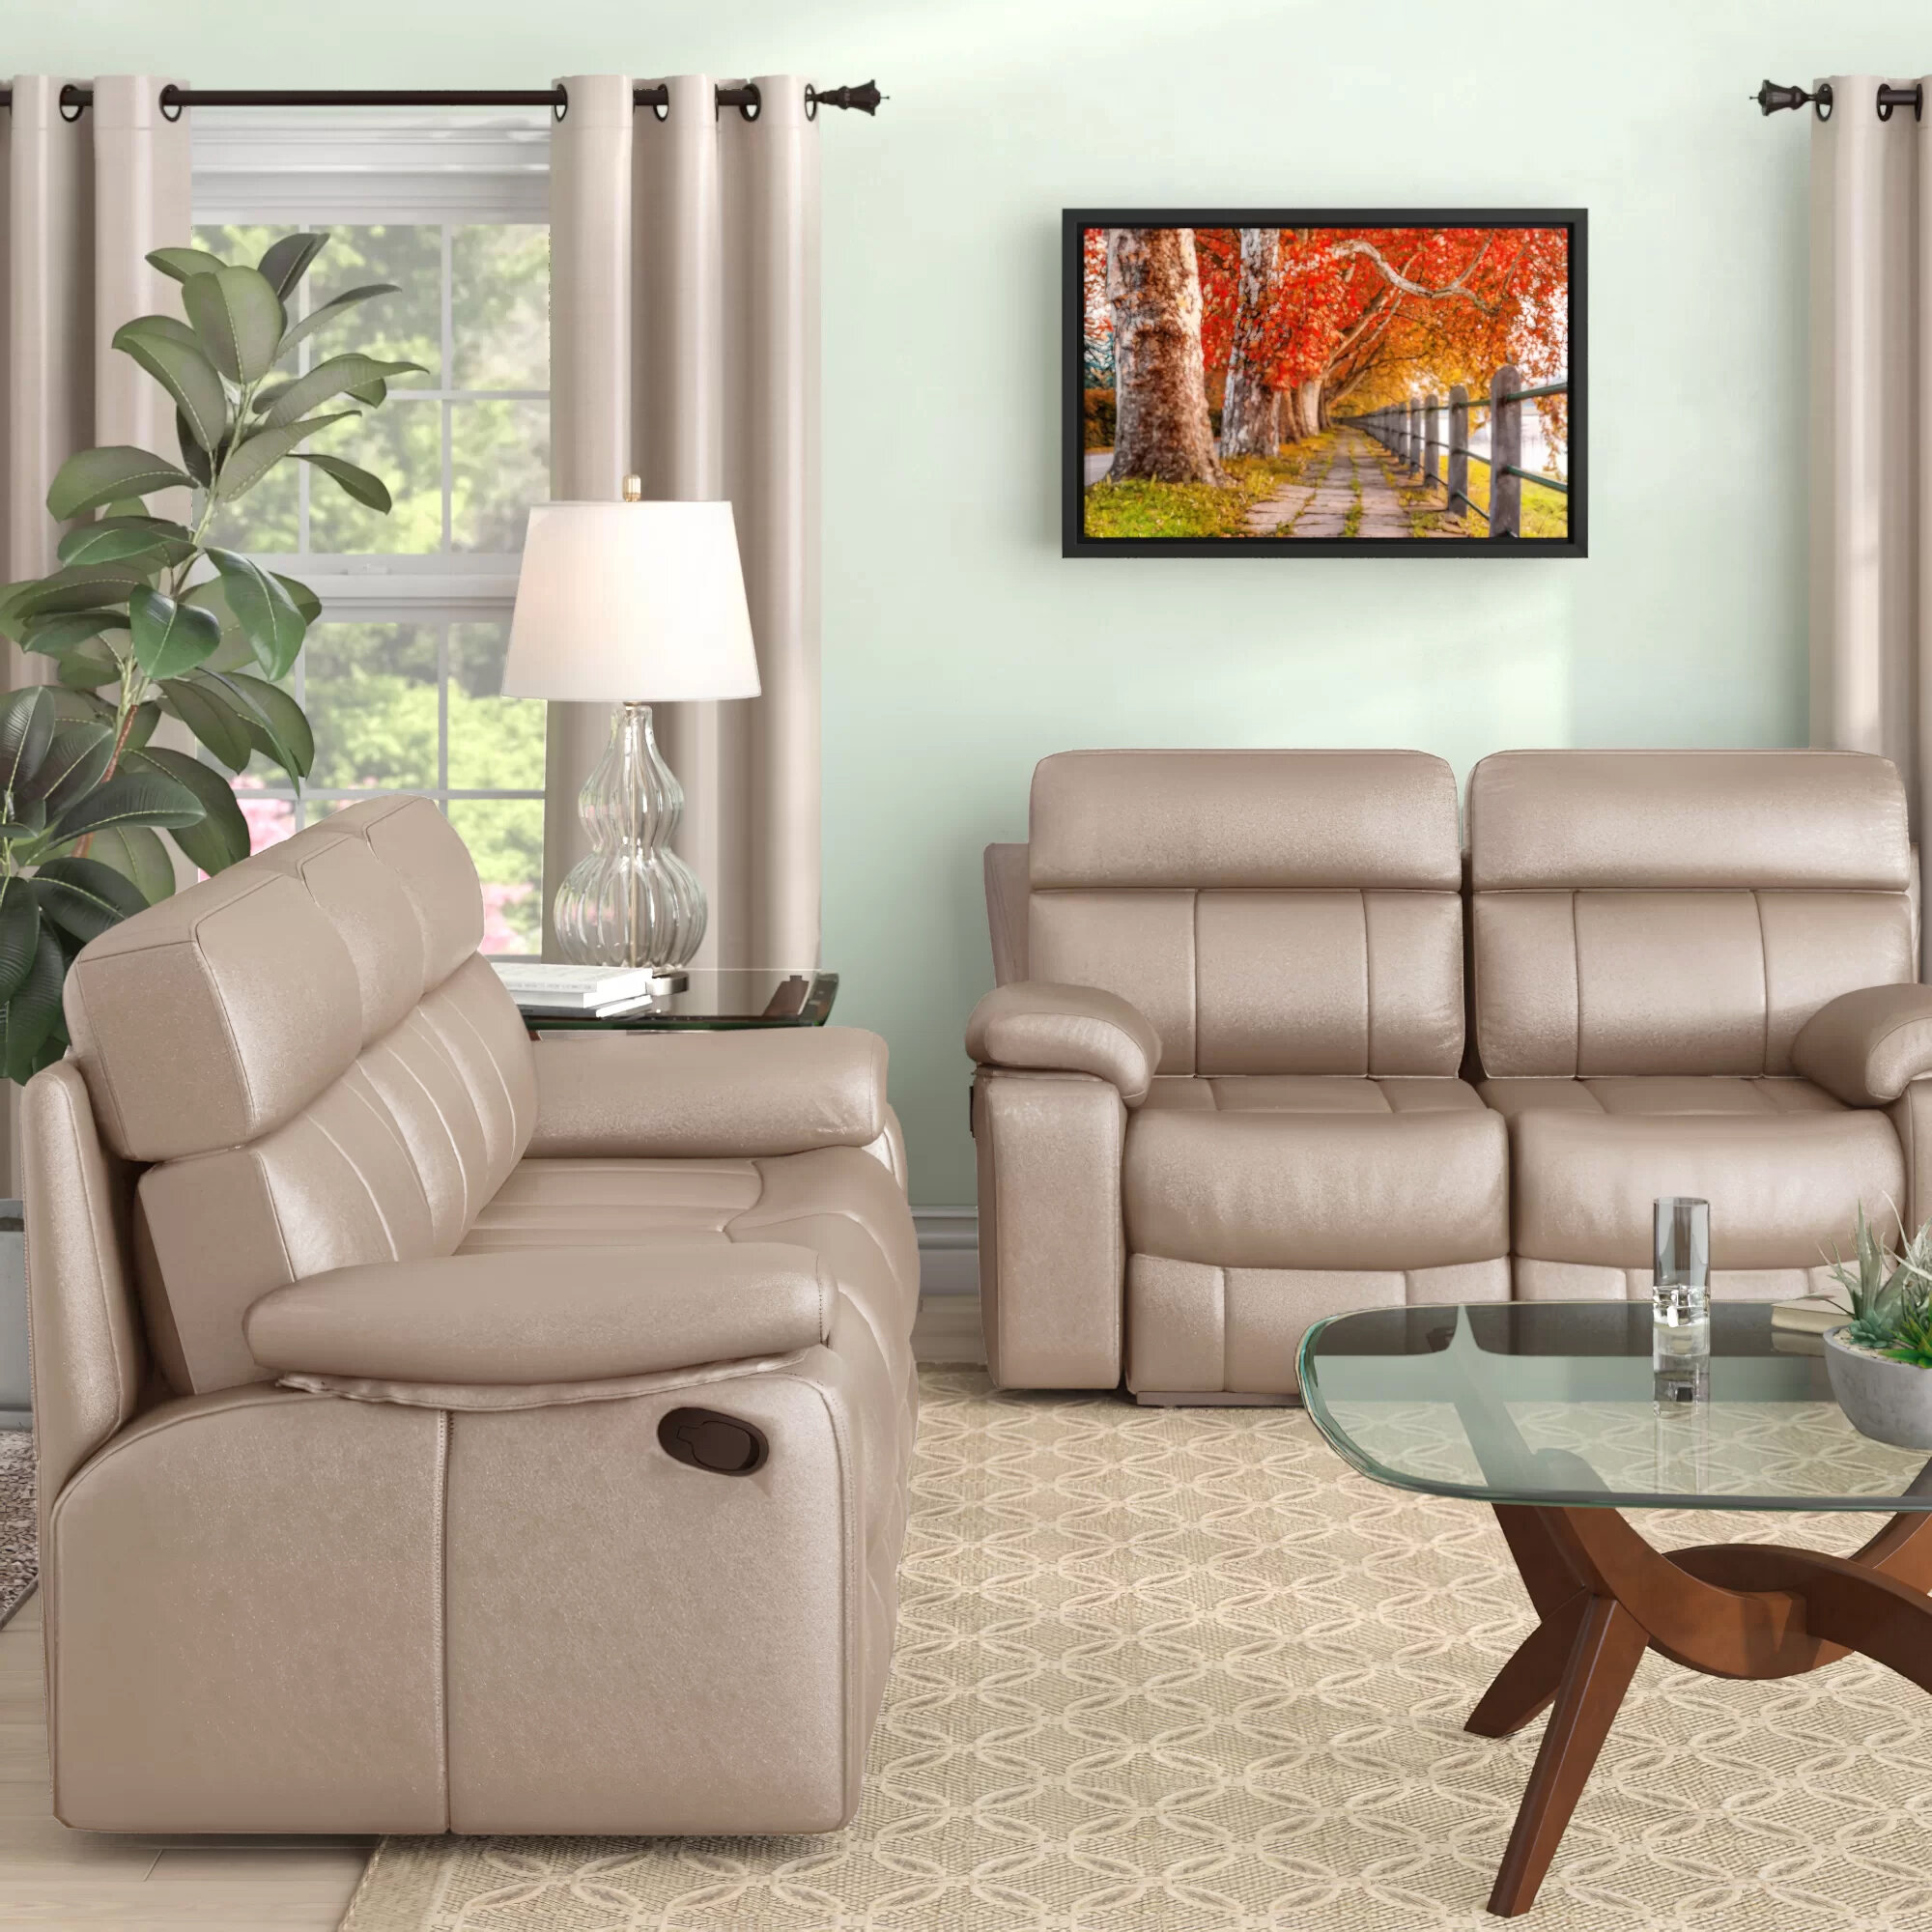 NEW Modern Tan Leather Sofa Loveseat Living Family Room Furniture Couch Set IRB1 